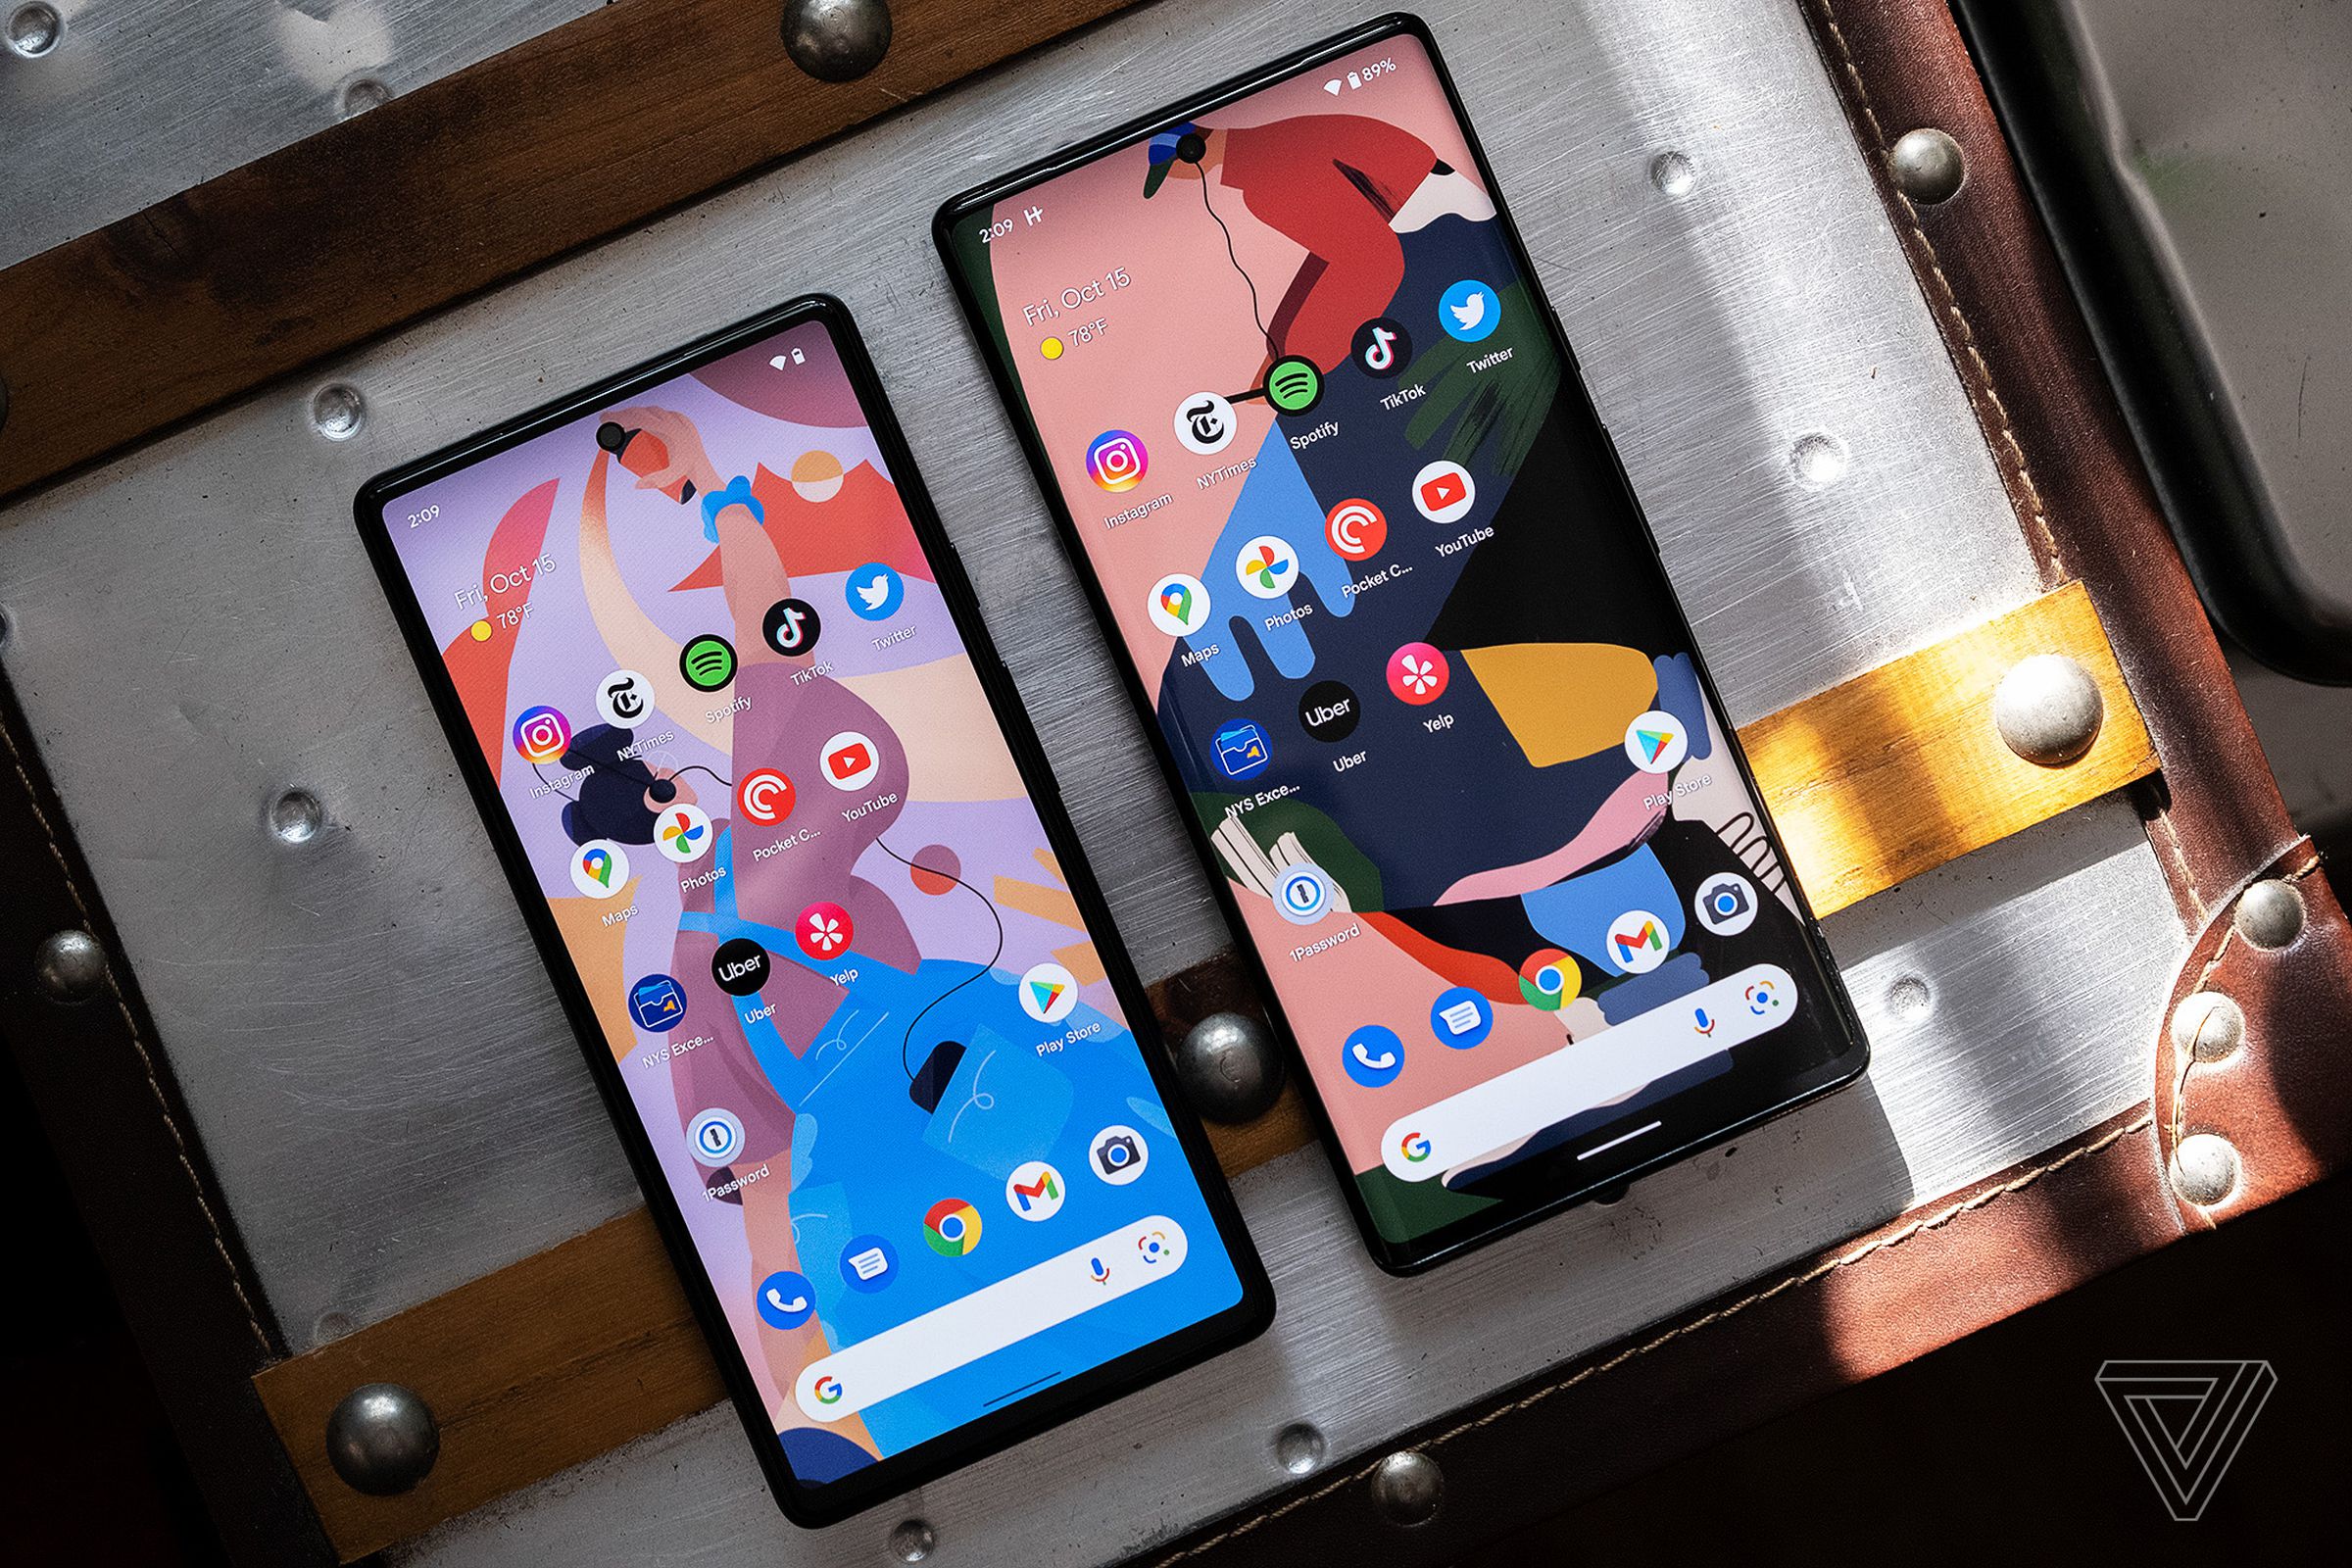 An image of Google’x Pixel 6 and Pixel 6 Pro phones side by side.